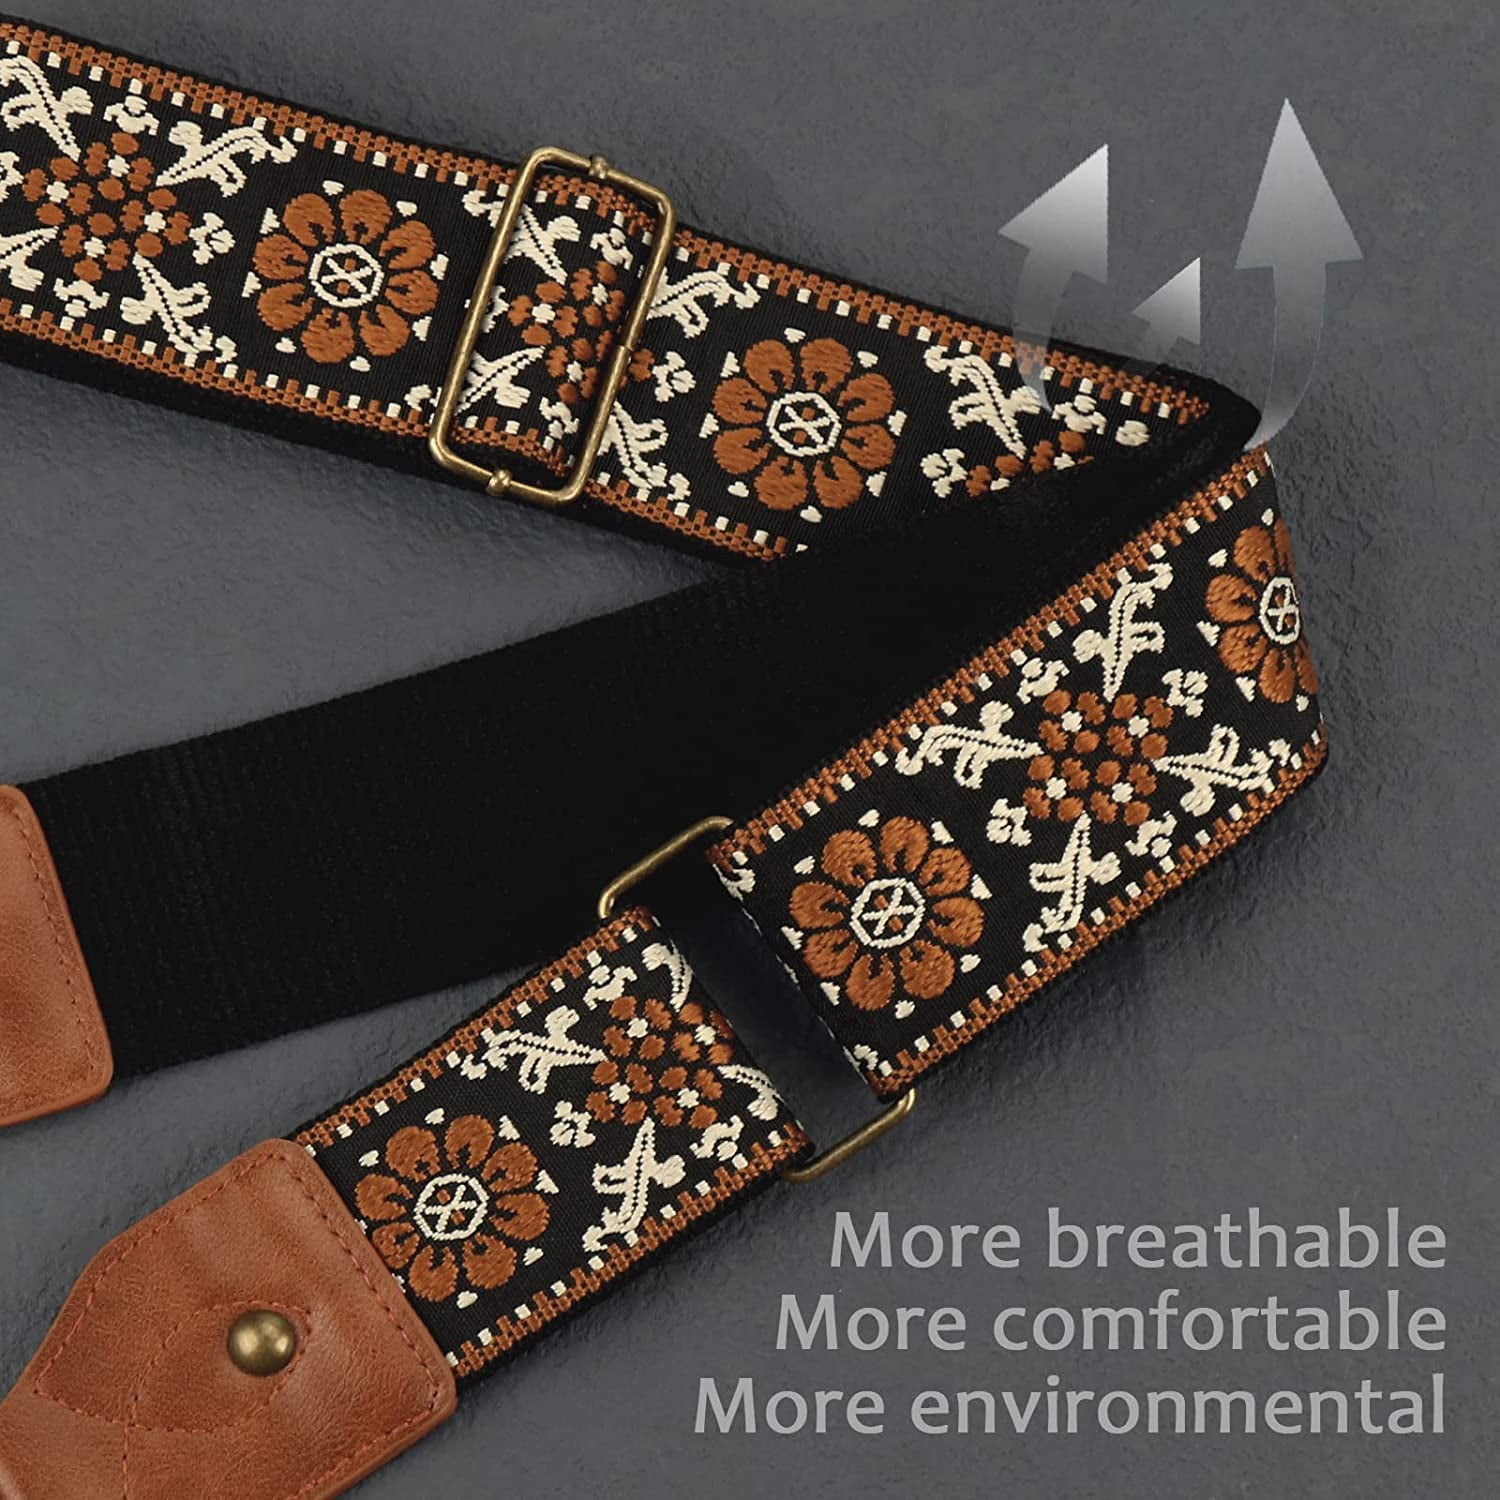 Purse Strap-2Crazy Horse Leather Wide Shoulder Strap Adjustable  Replacement,Jacquard Embroidery Crossbody Bag Straps